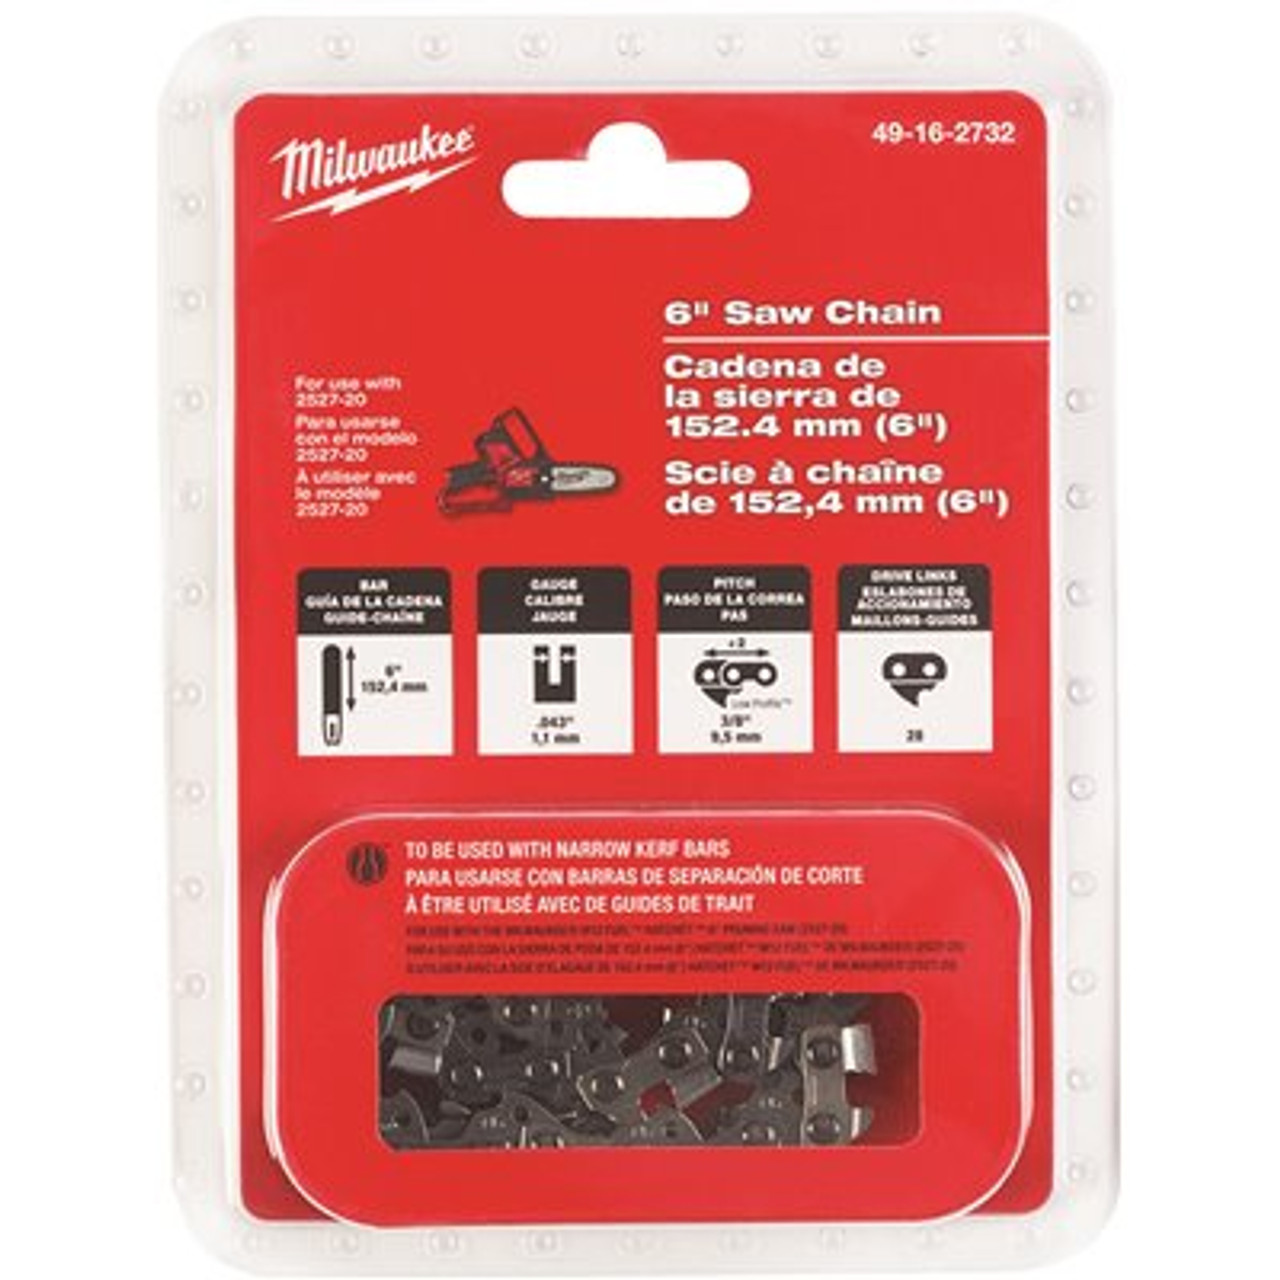 Milwaukee 6 in. Pruning Saw Chain with 28 Drive Links